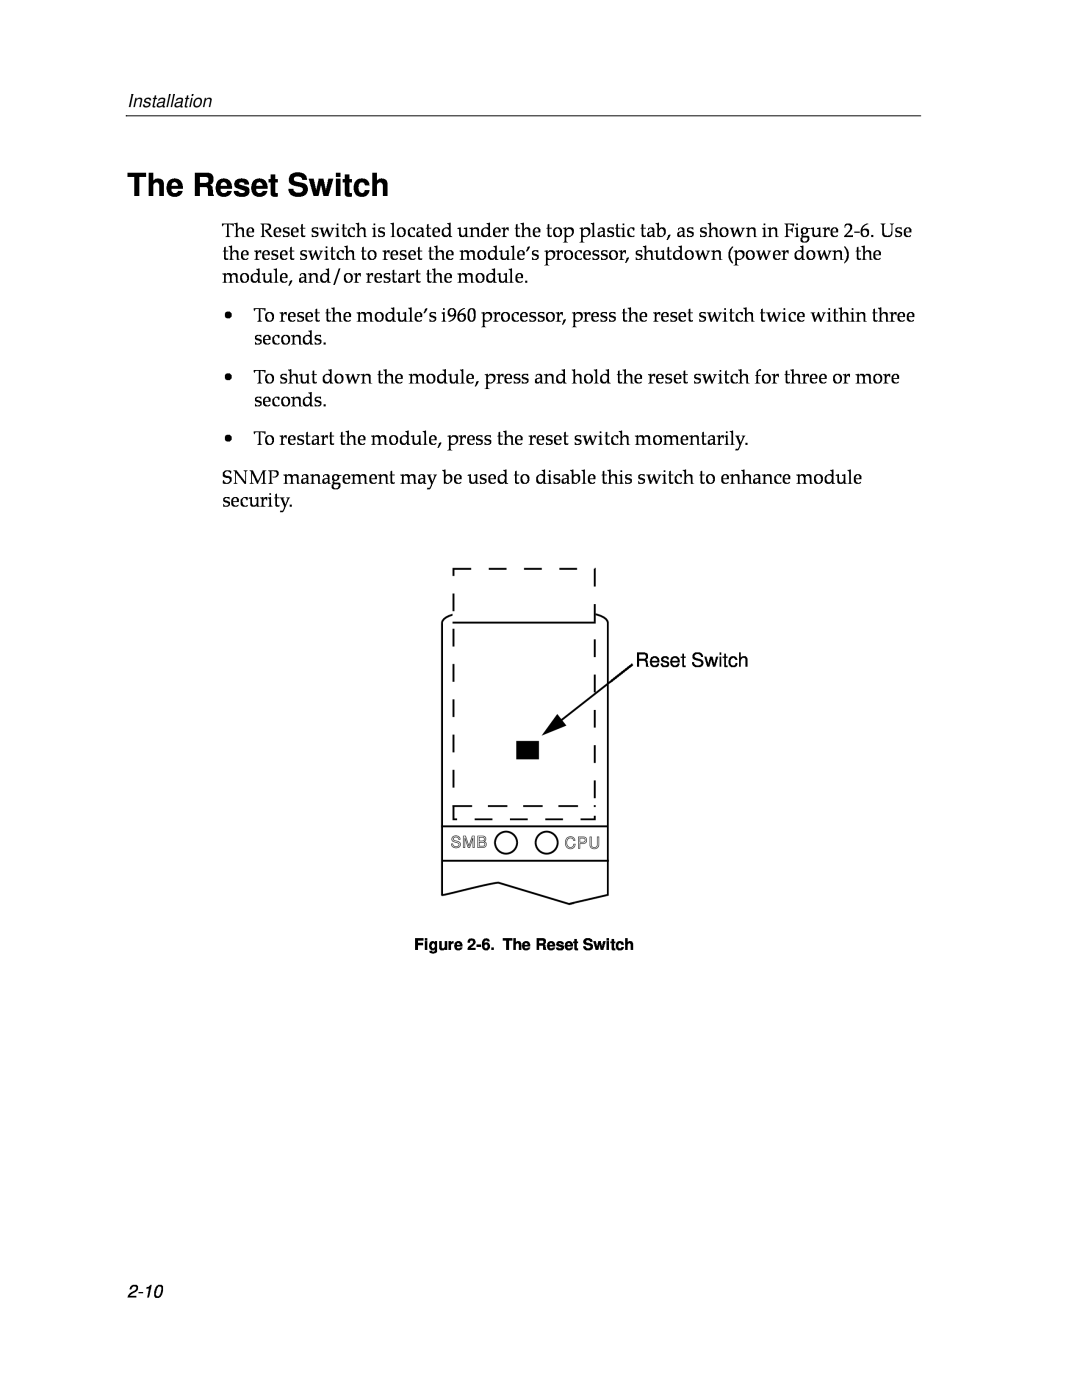 Cabletron Systems 9000 manual The Reset Switch 